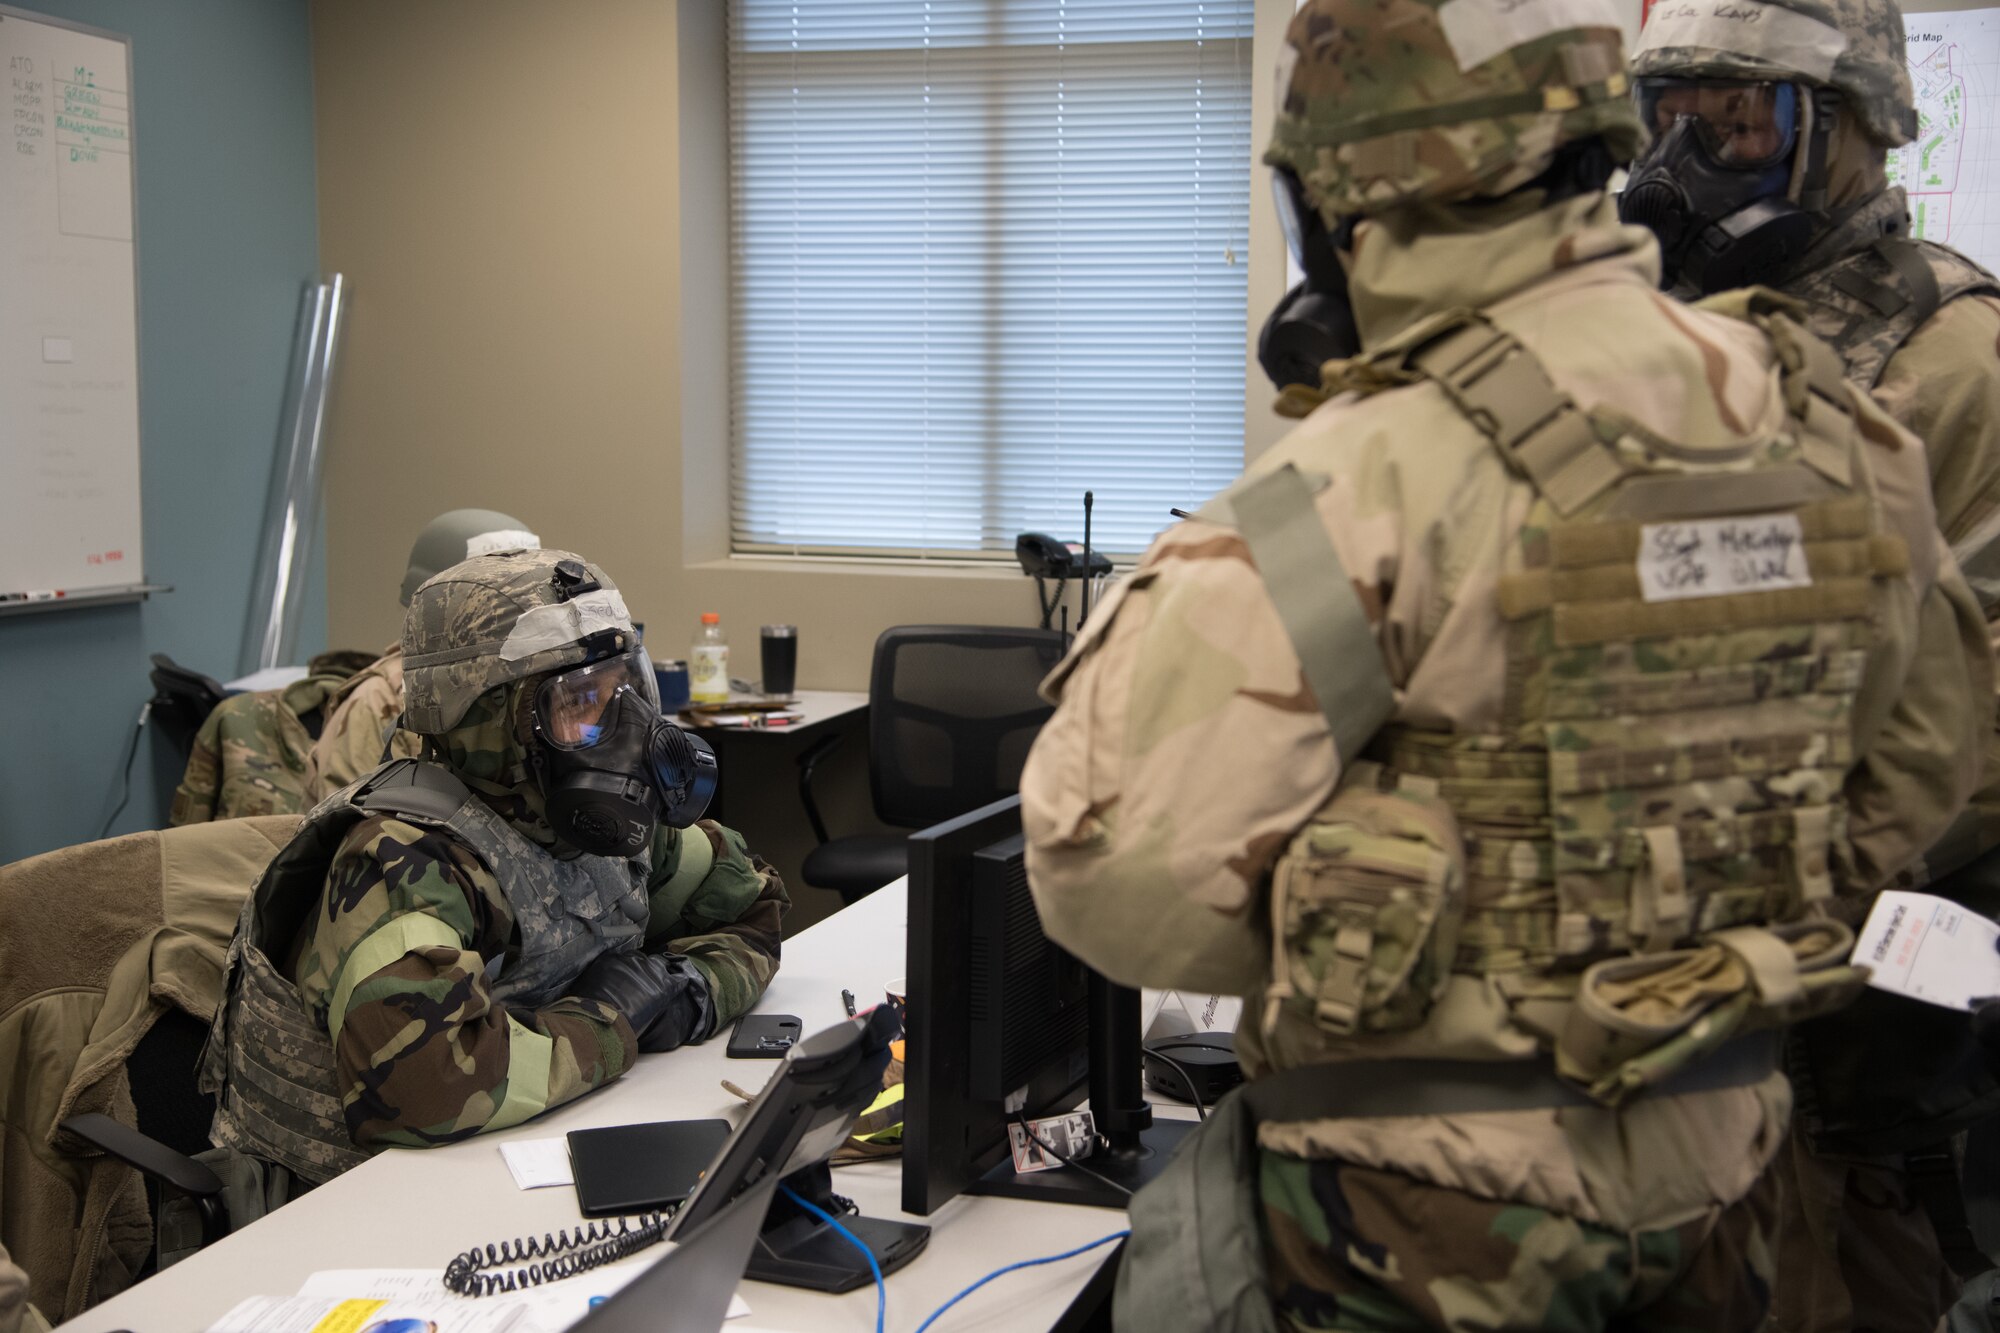 Two Airmen in chemical protective gear report to the wing commander sitting at a desk during a training exercise.